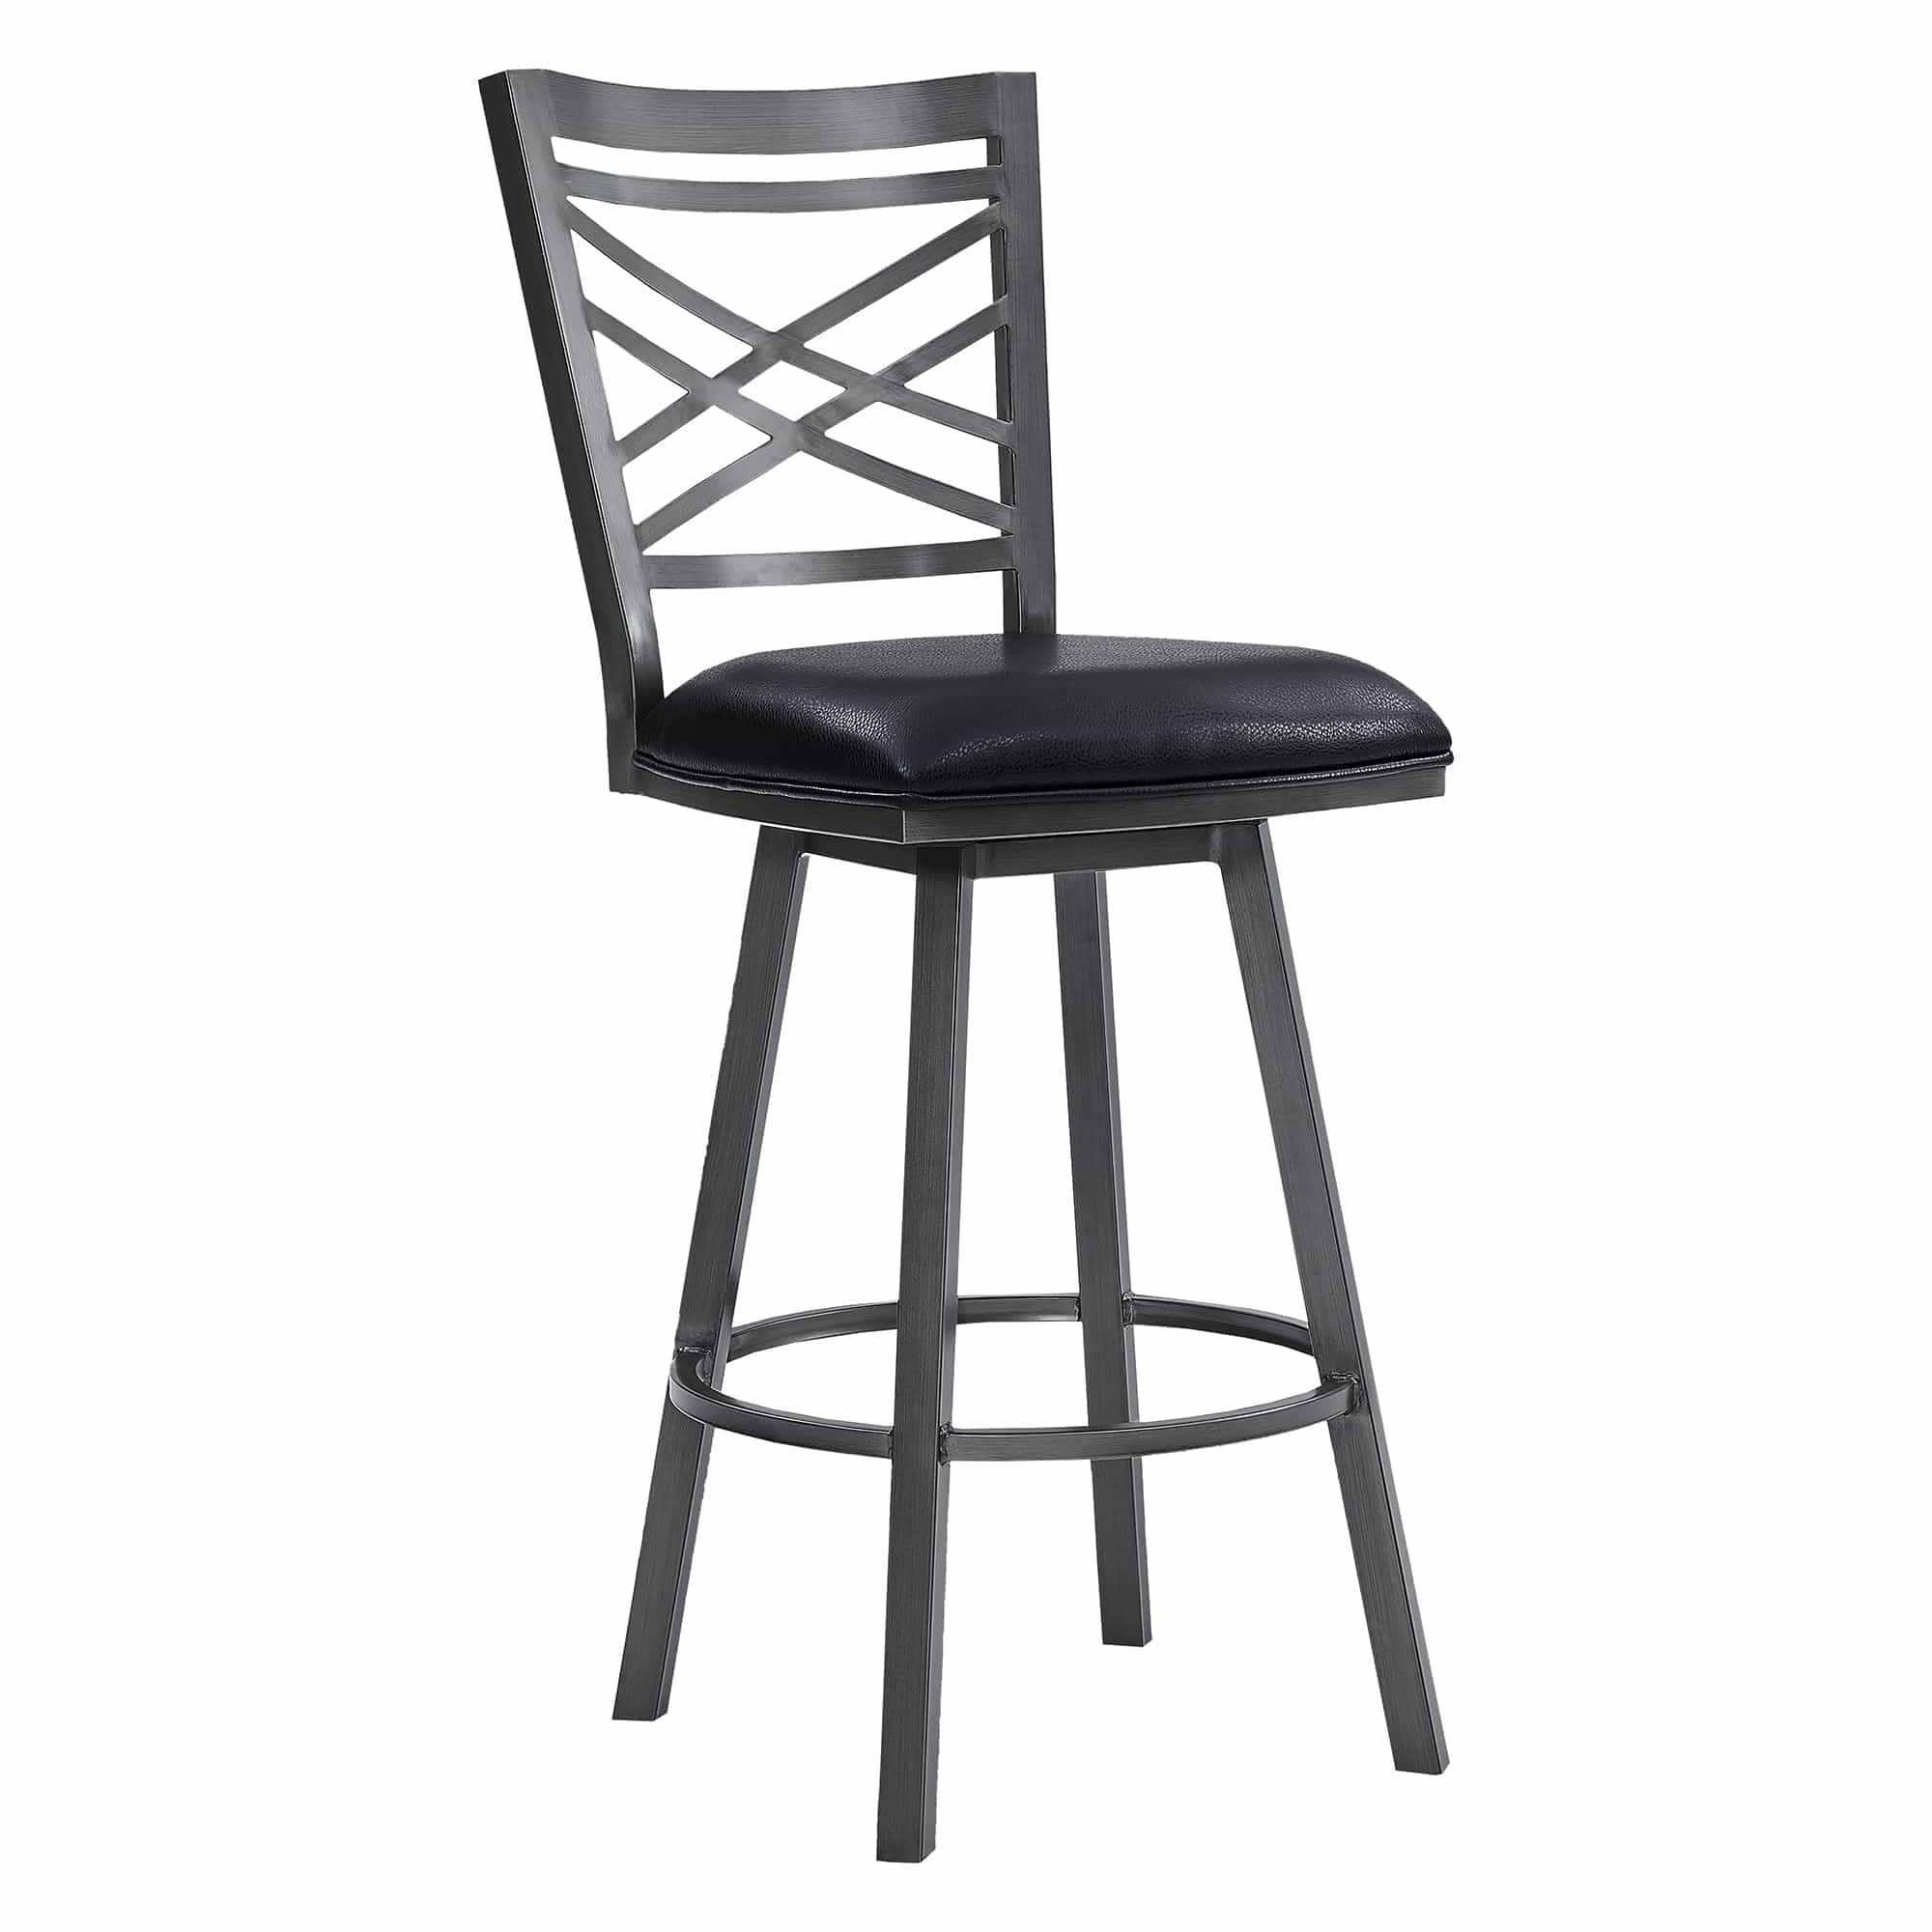 Armen Living Barstool Armen Living | Fargo 30" Counter Height Metal Barstool in Mineral Finish with Black Faux Leather | LCFA30BAMFBL